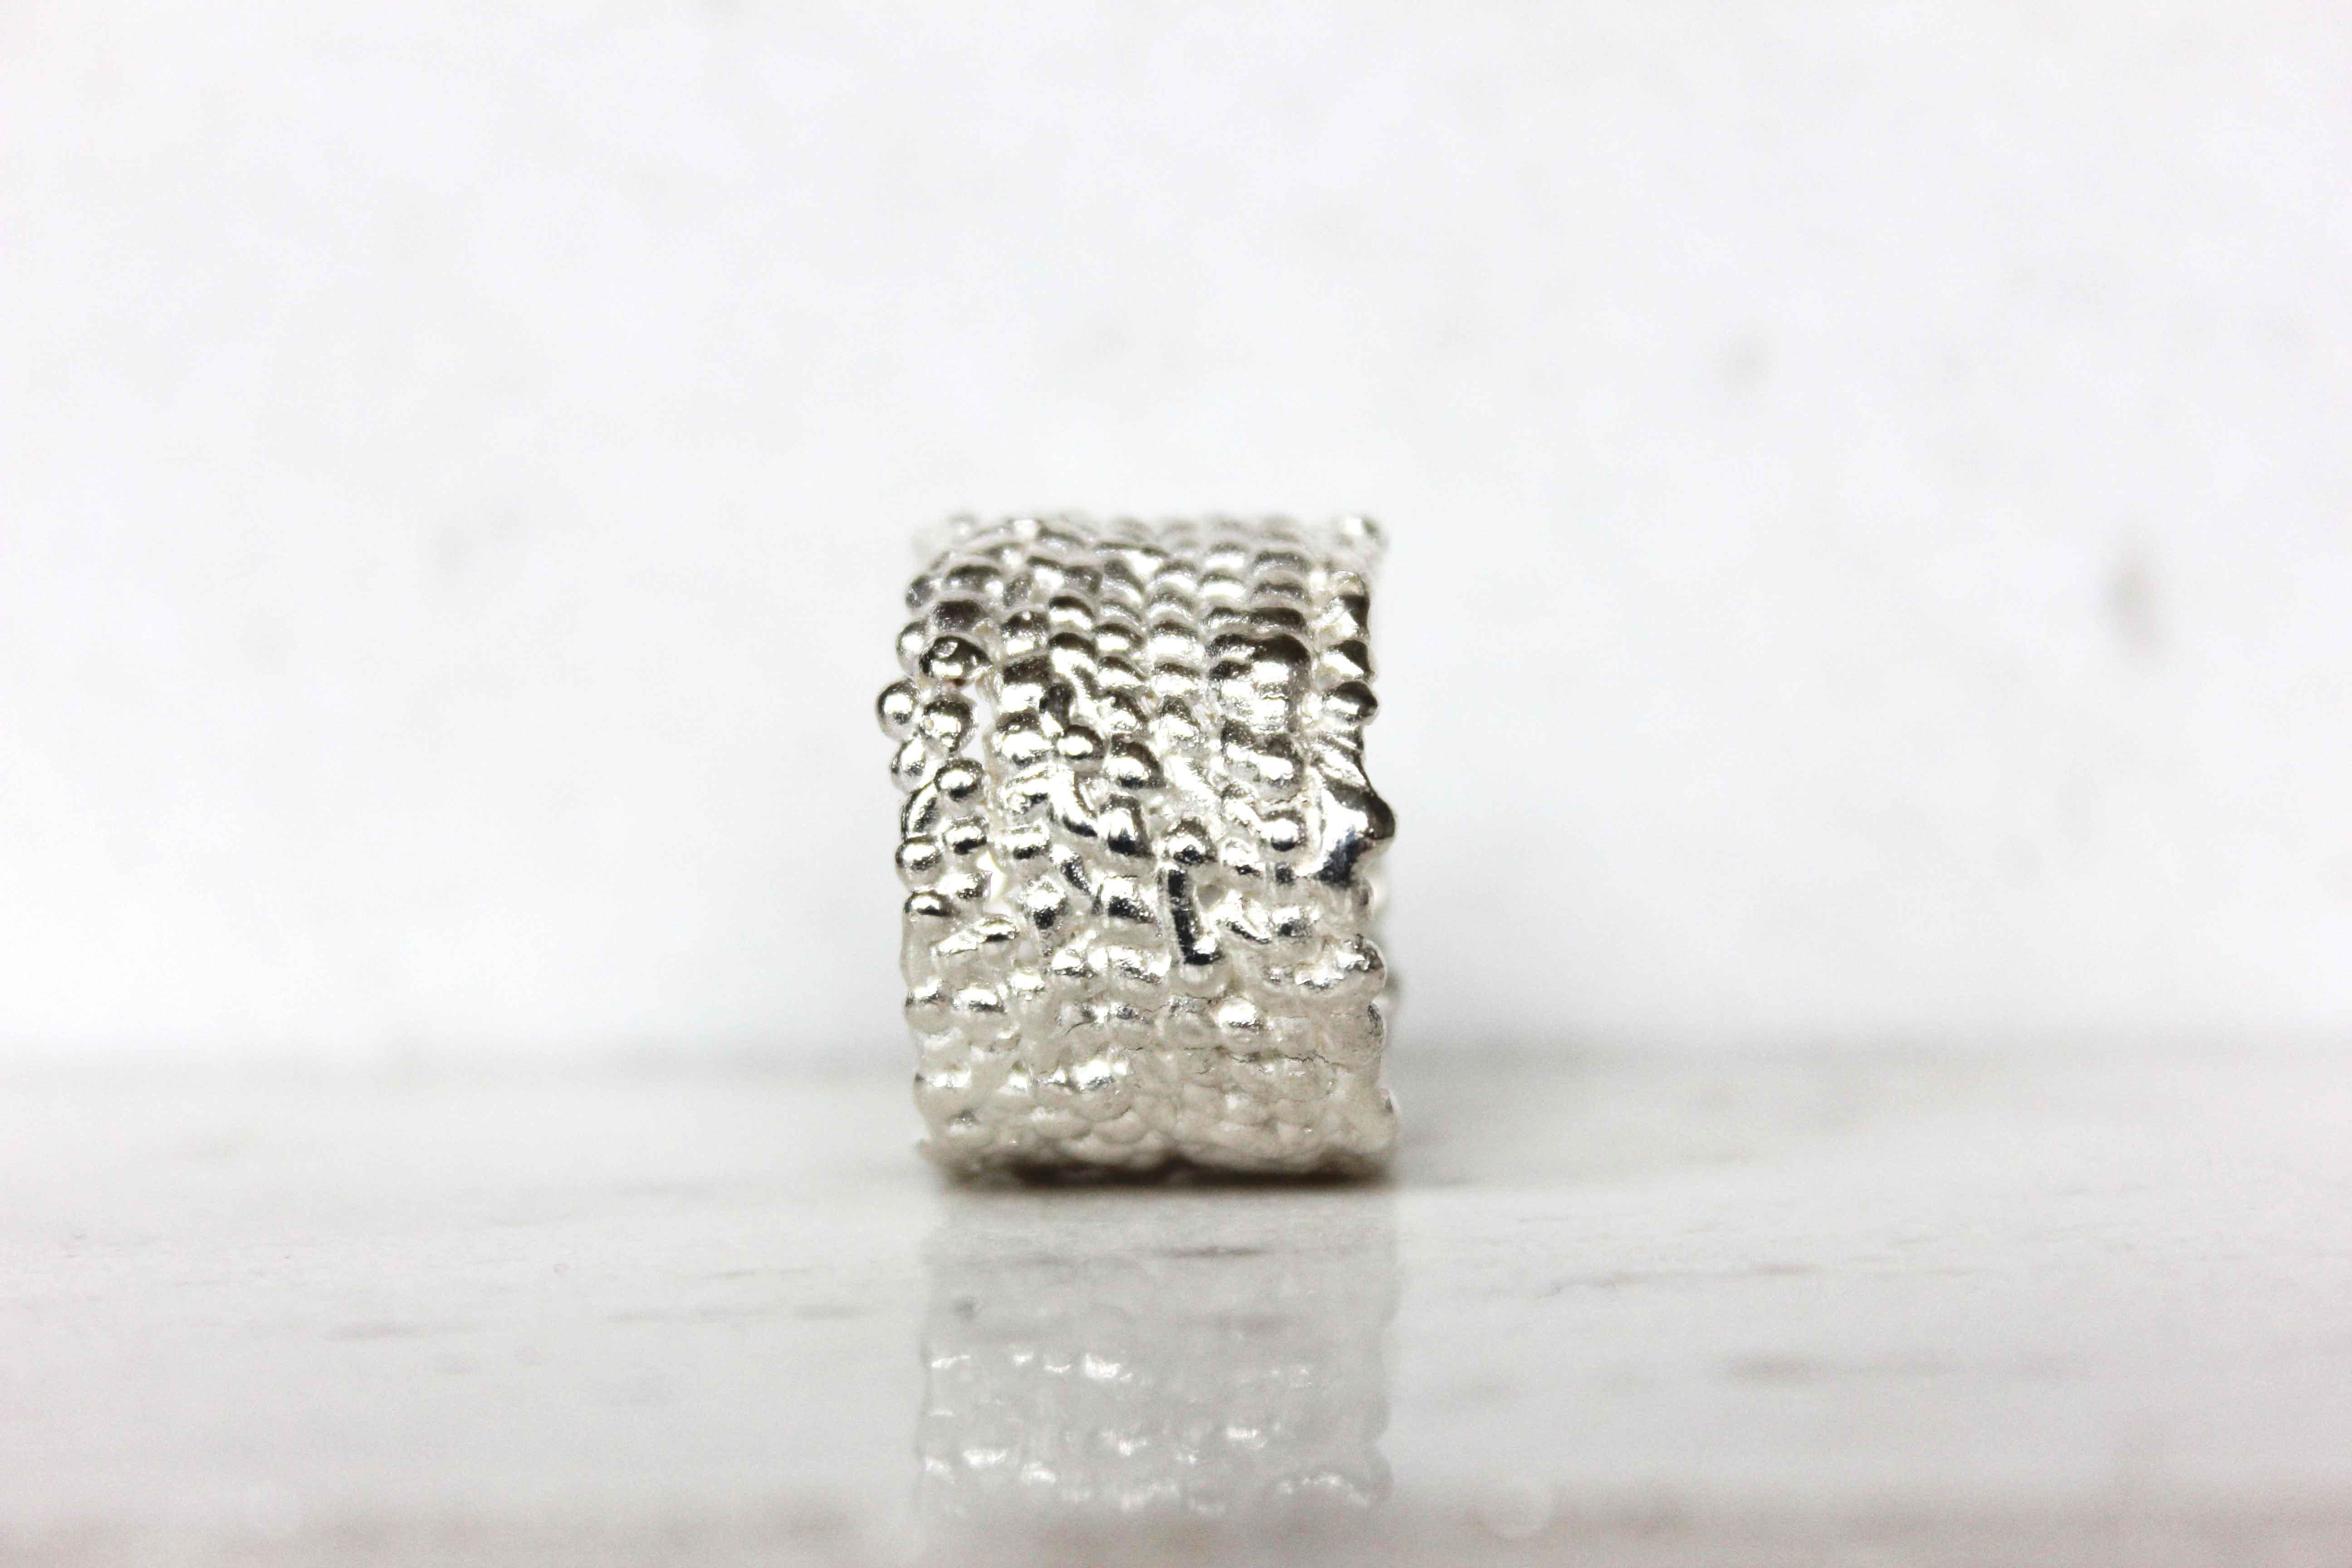 Bubbles chunky silver ring

A chunky silver ring with a textured organic feel.

A statement ring that is made of little tiny different size droplets in sterling silver that create an incredible sparkle which draw attention.

You can choose between a